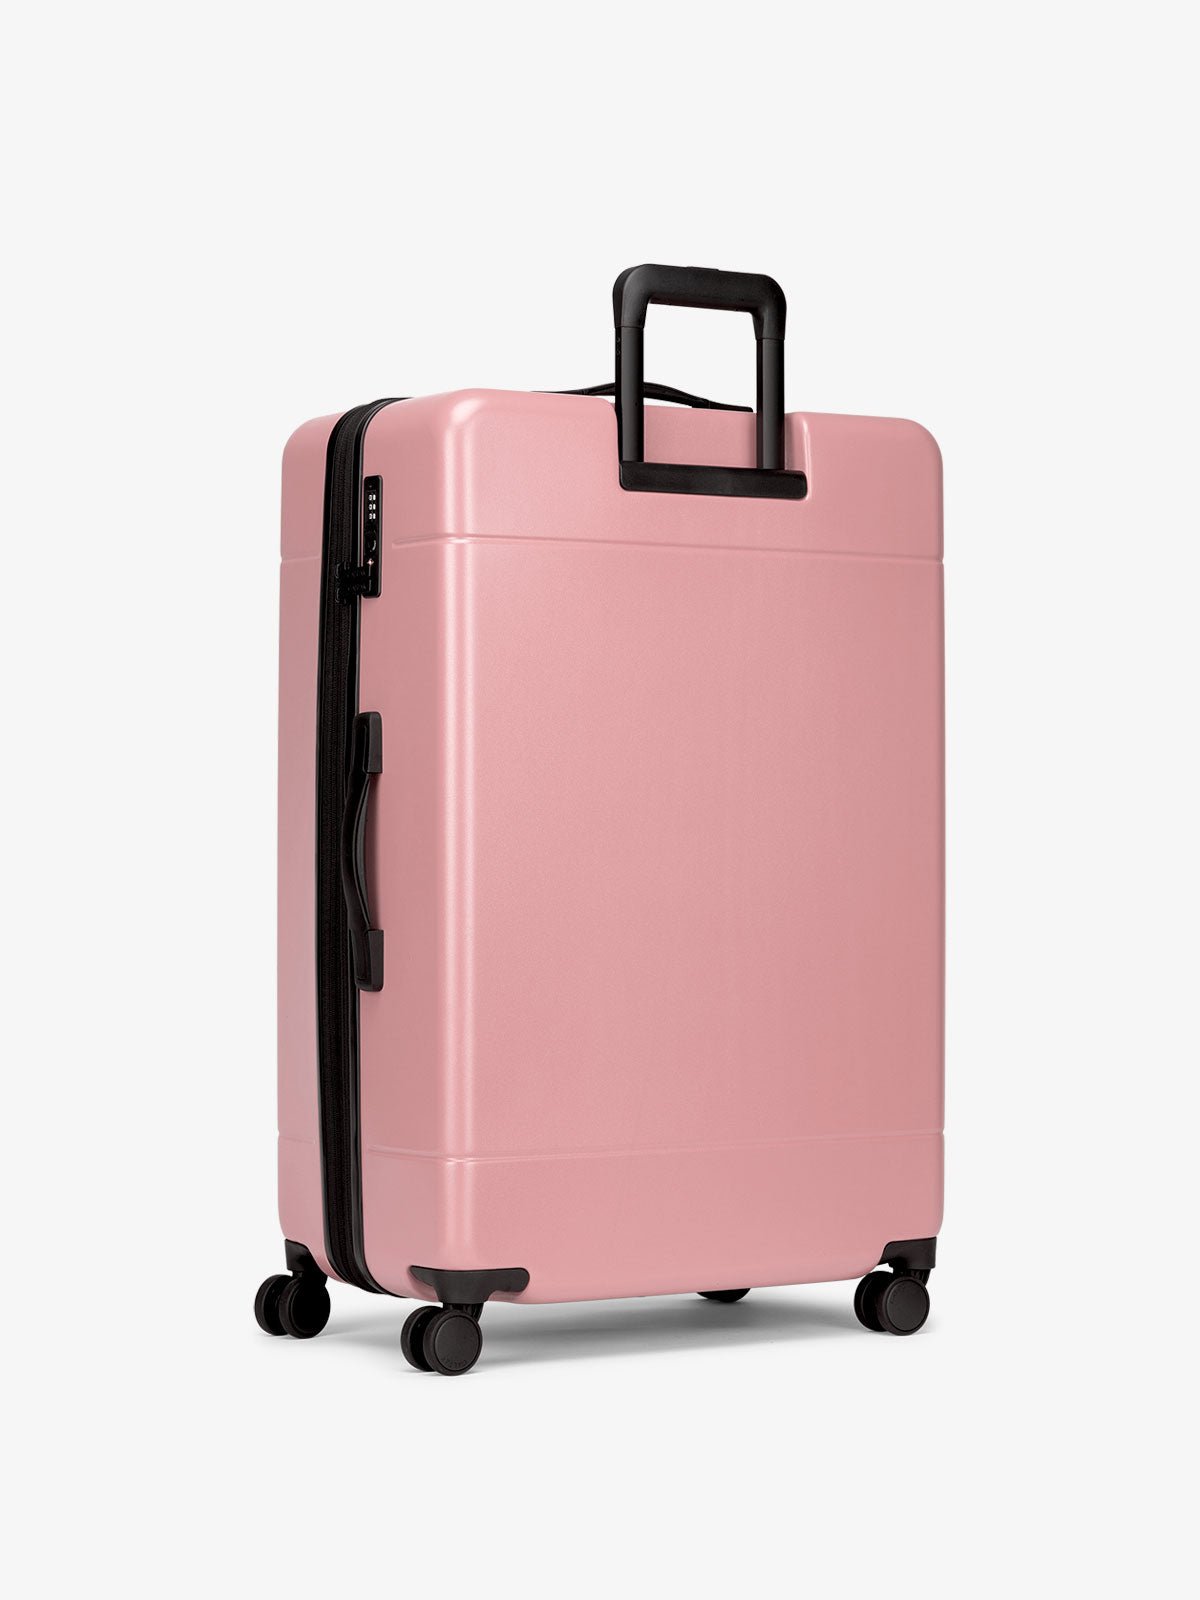 Hue large 28 inch durable hard shell polycarbonate luggage in mauve pink